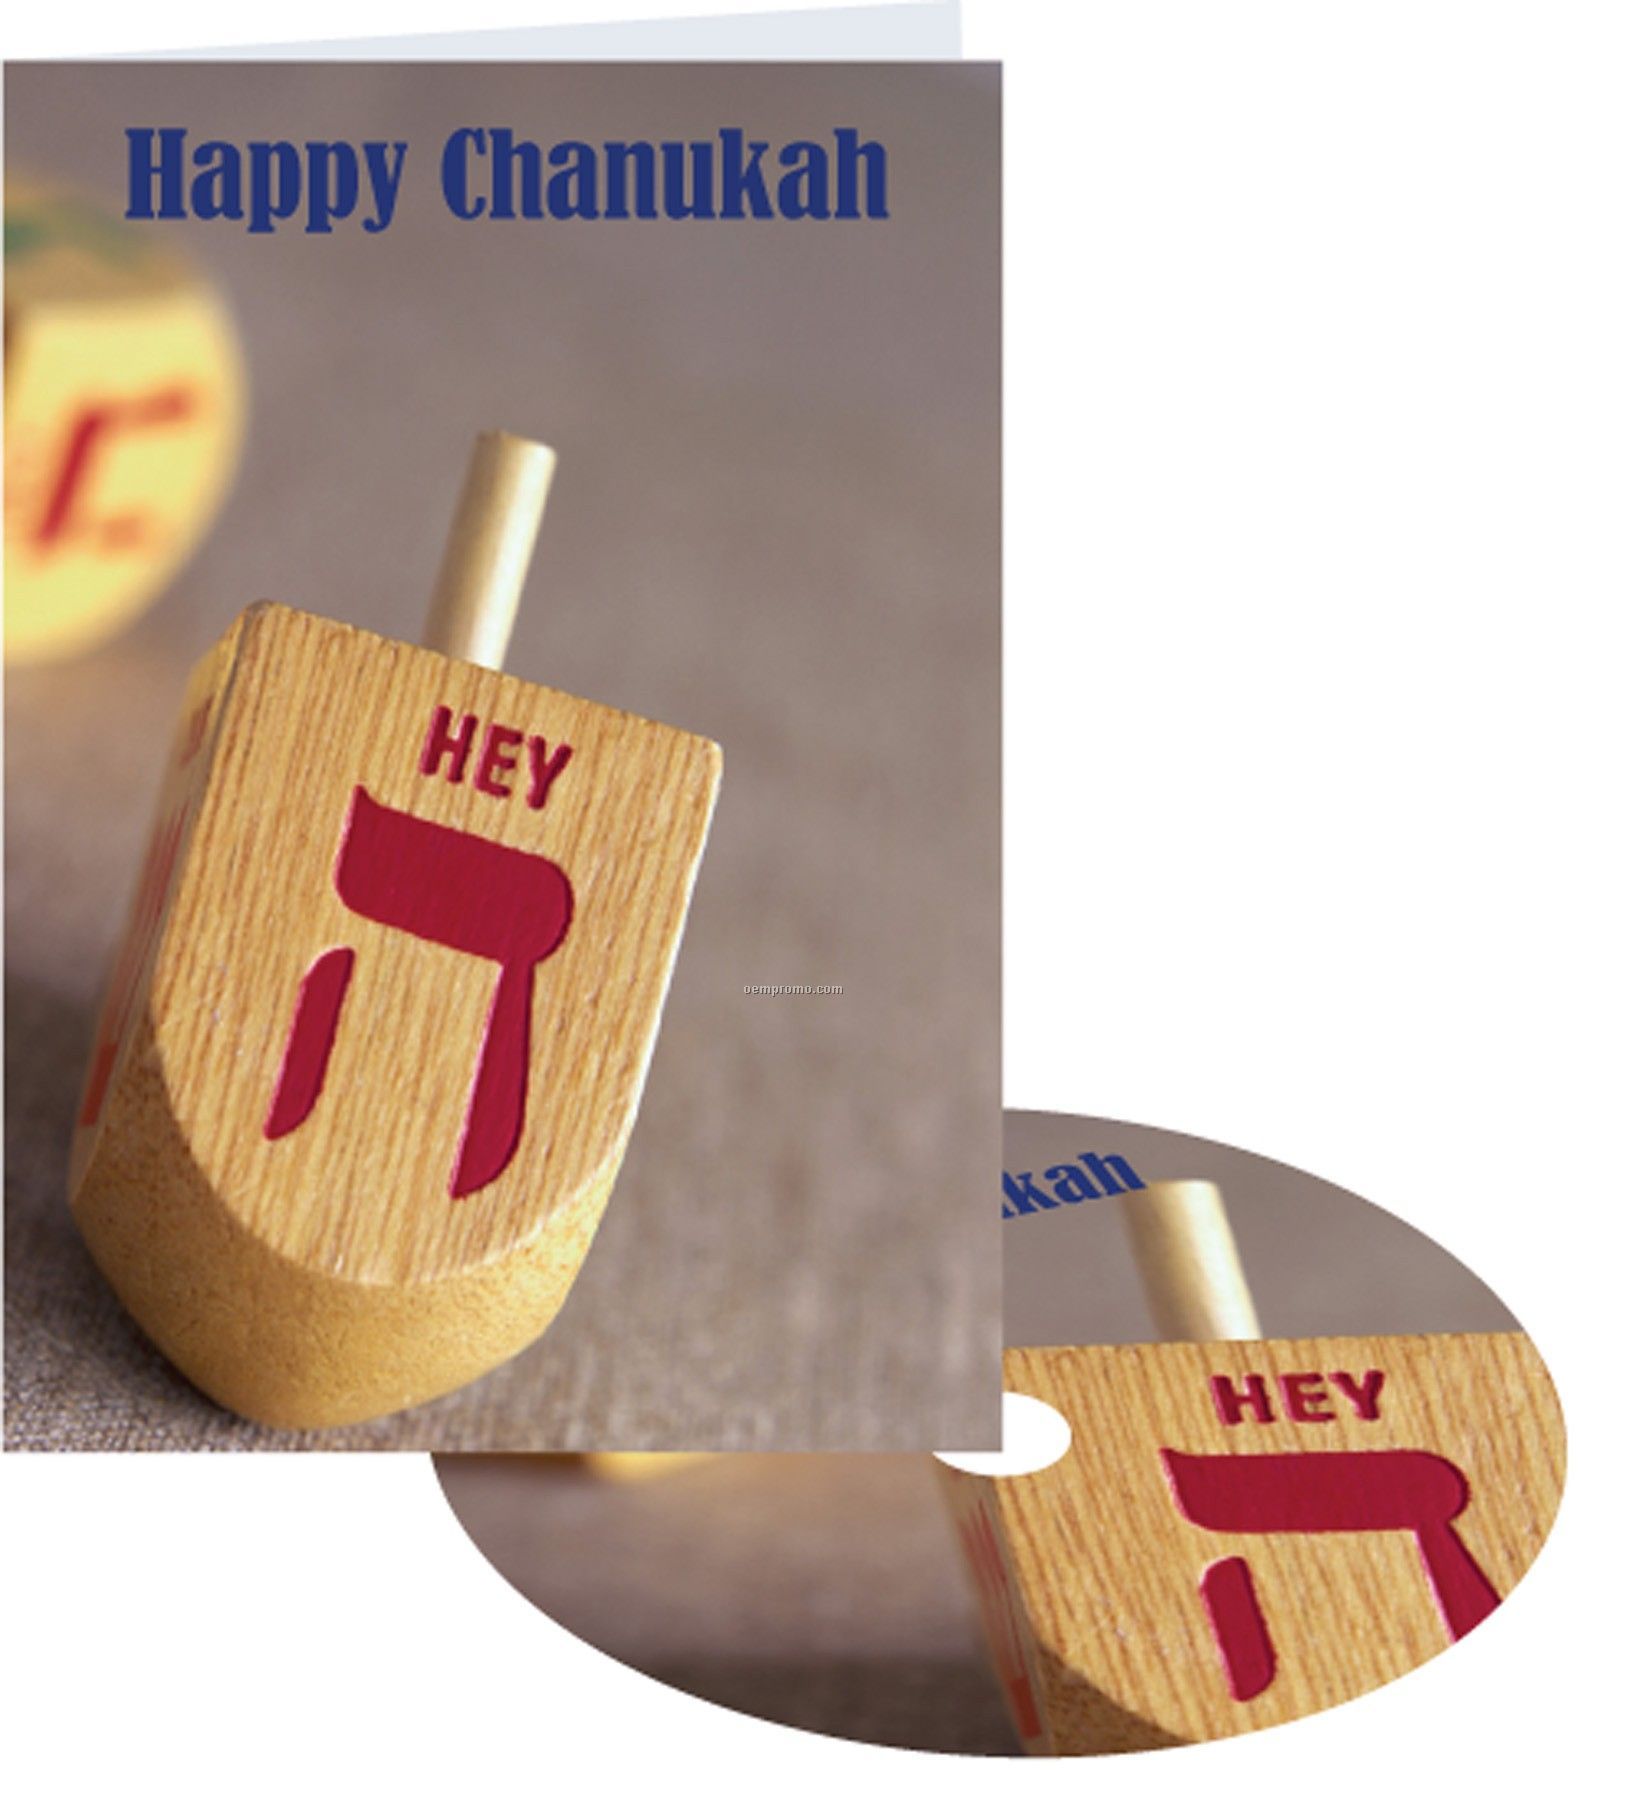 Happy Chanukah Greeting Card With Matching CD